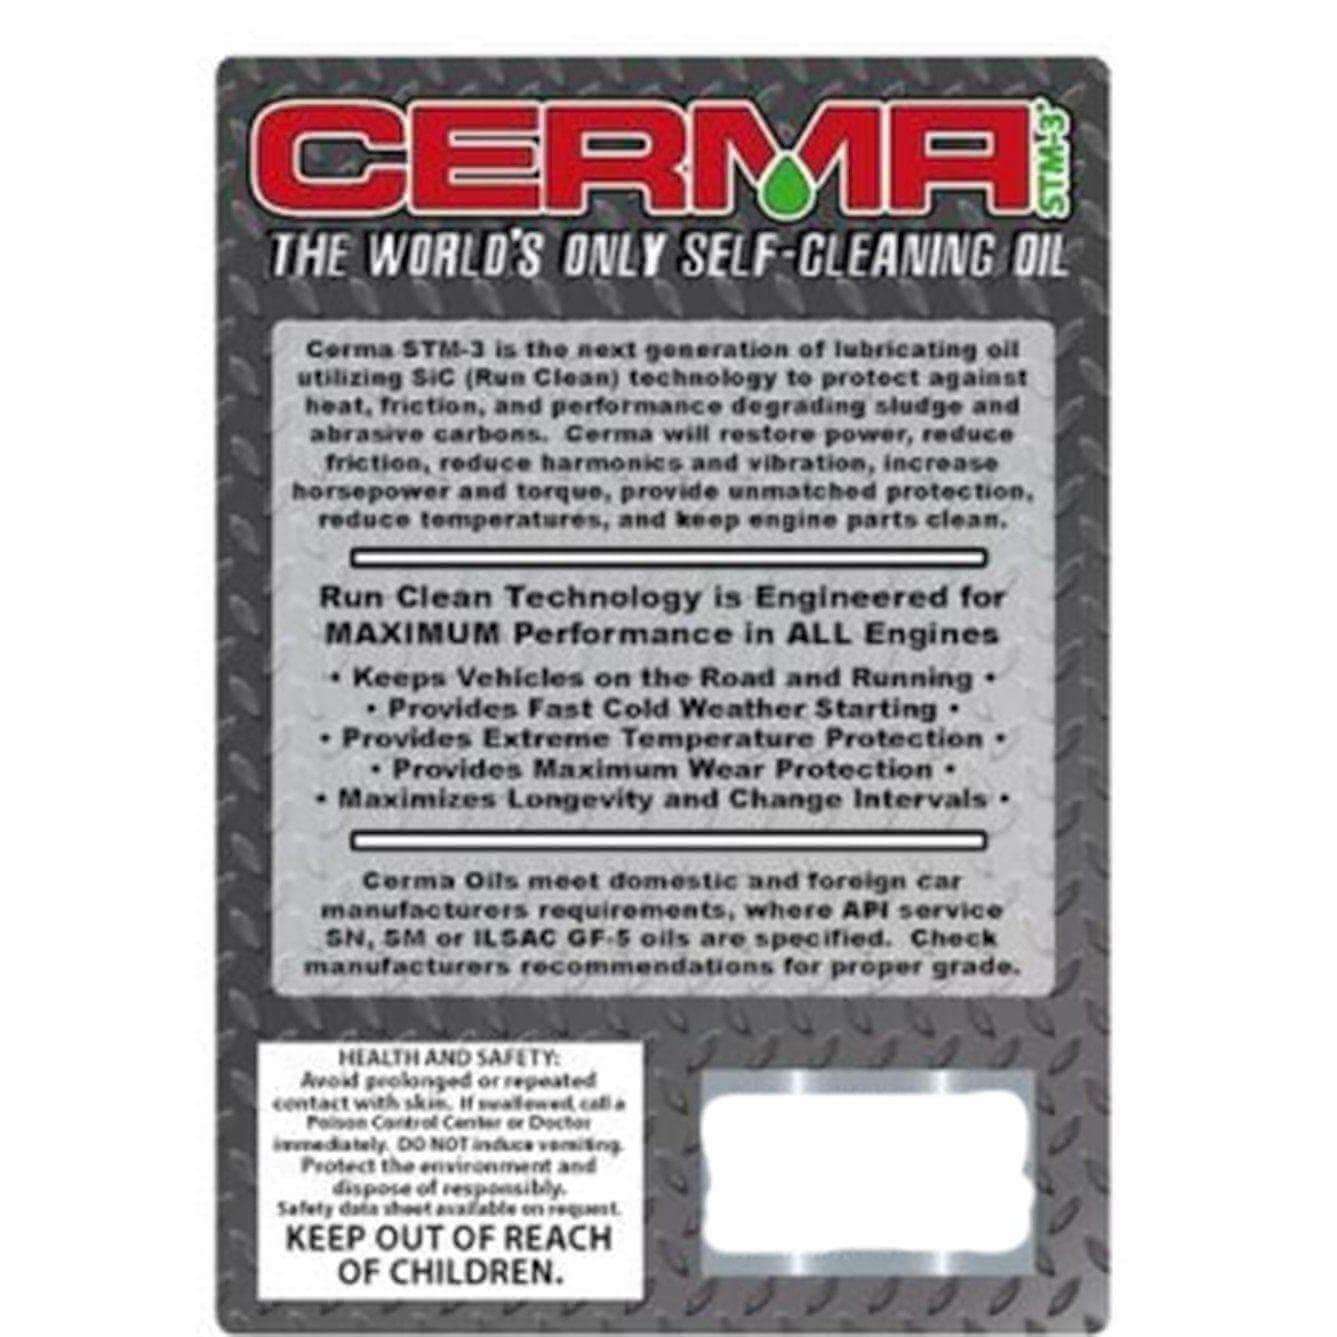 Cermax Ceramic 10w-30W Synthetic Motor Oil at $14.75 only from cermatreatment.com